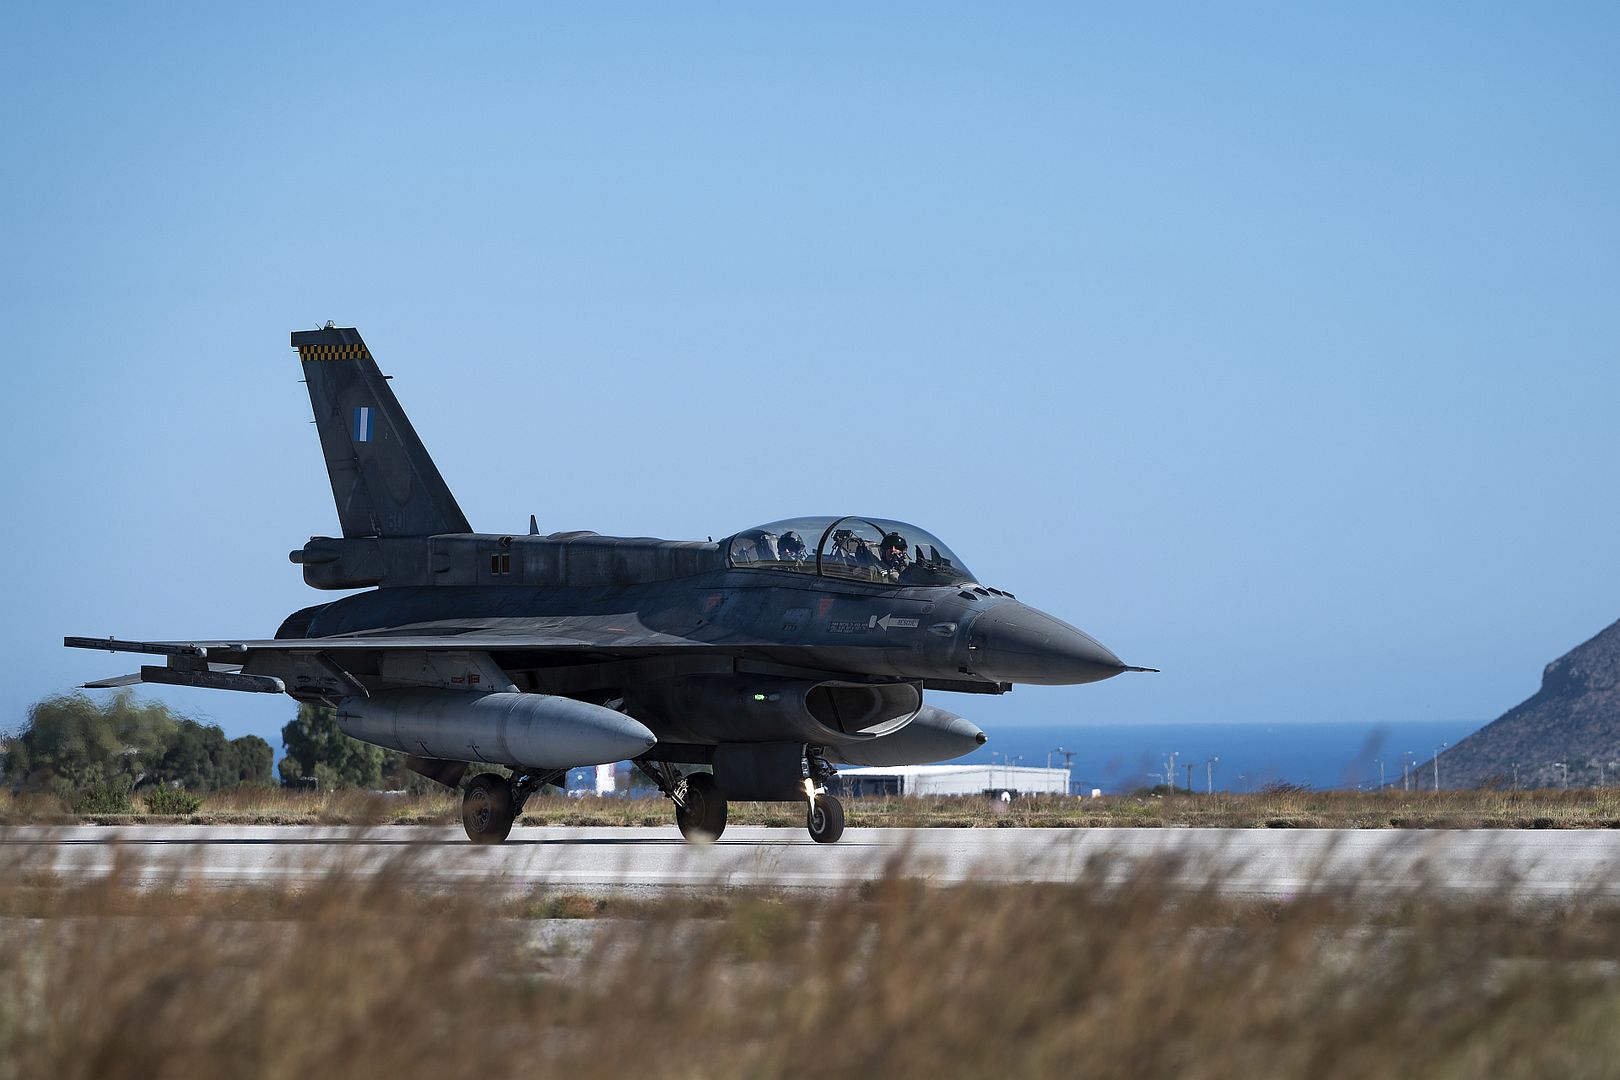 16D Fighting Falcon Taxis Prior To Take Off During Exercise Poseidon S Rage At Souda Bay Greece May 31 2021